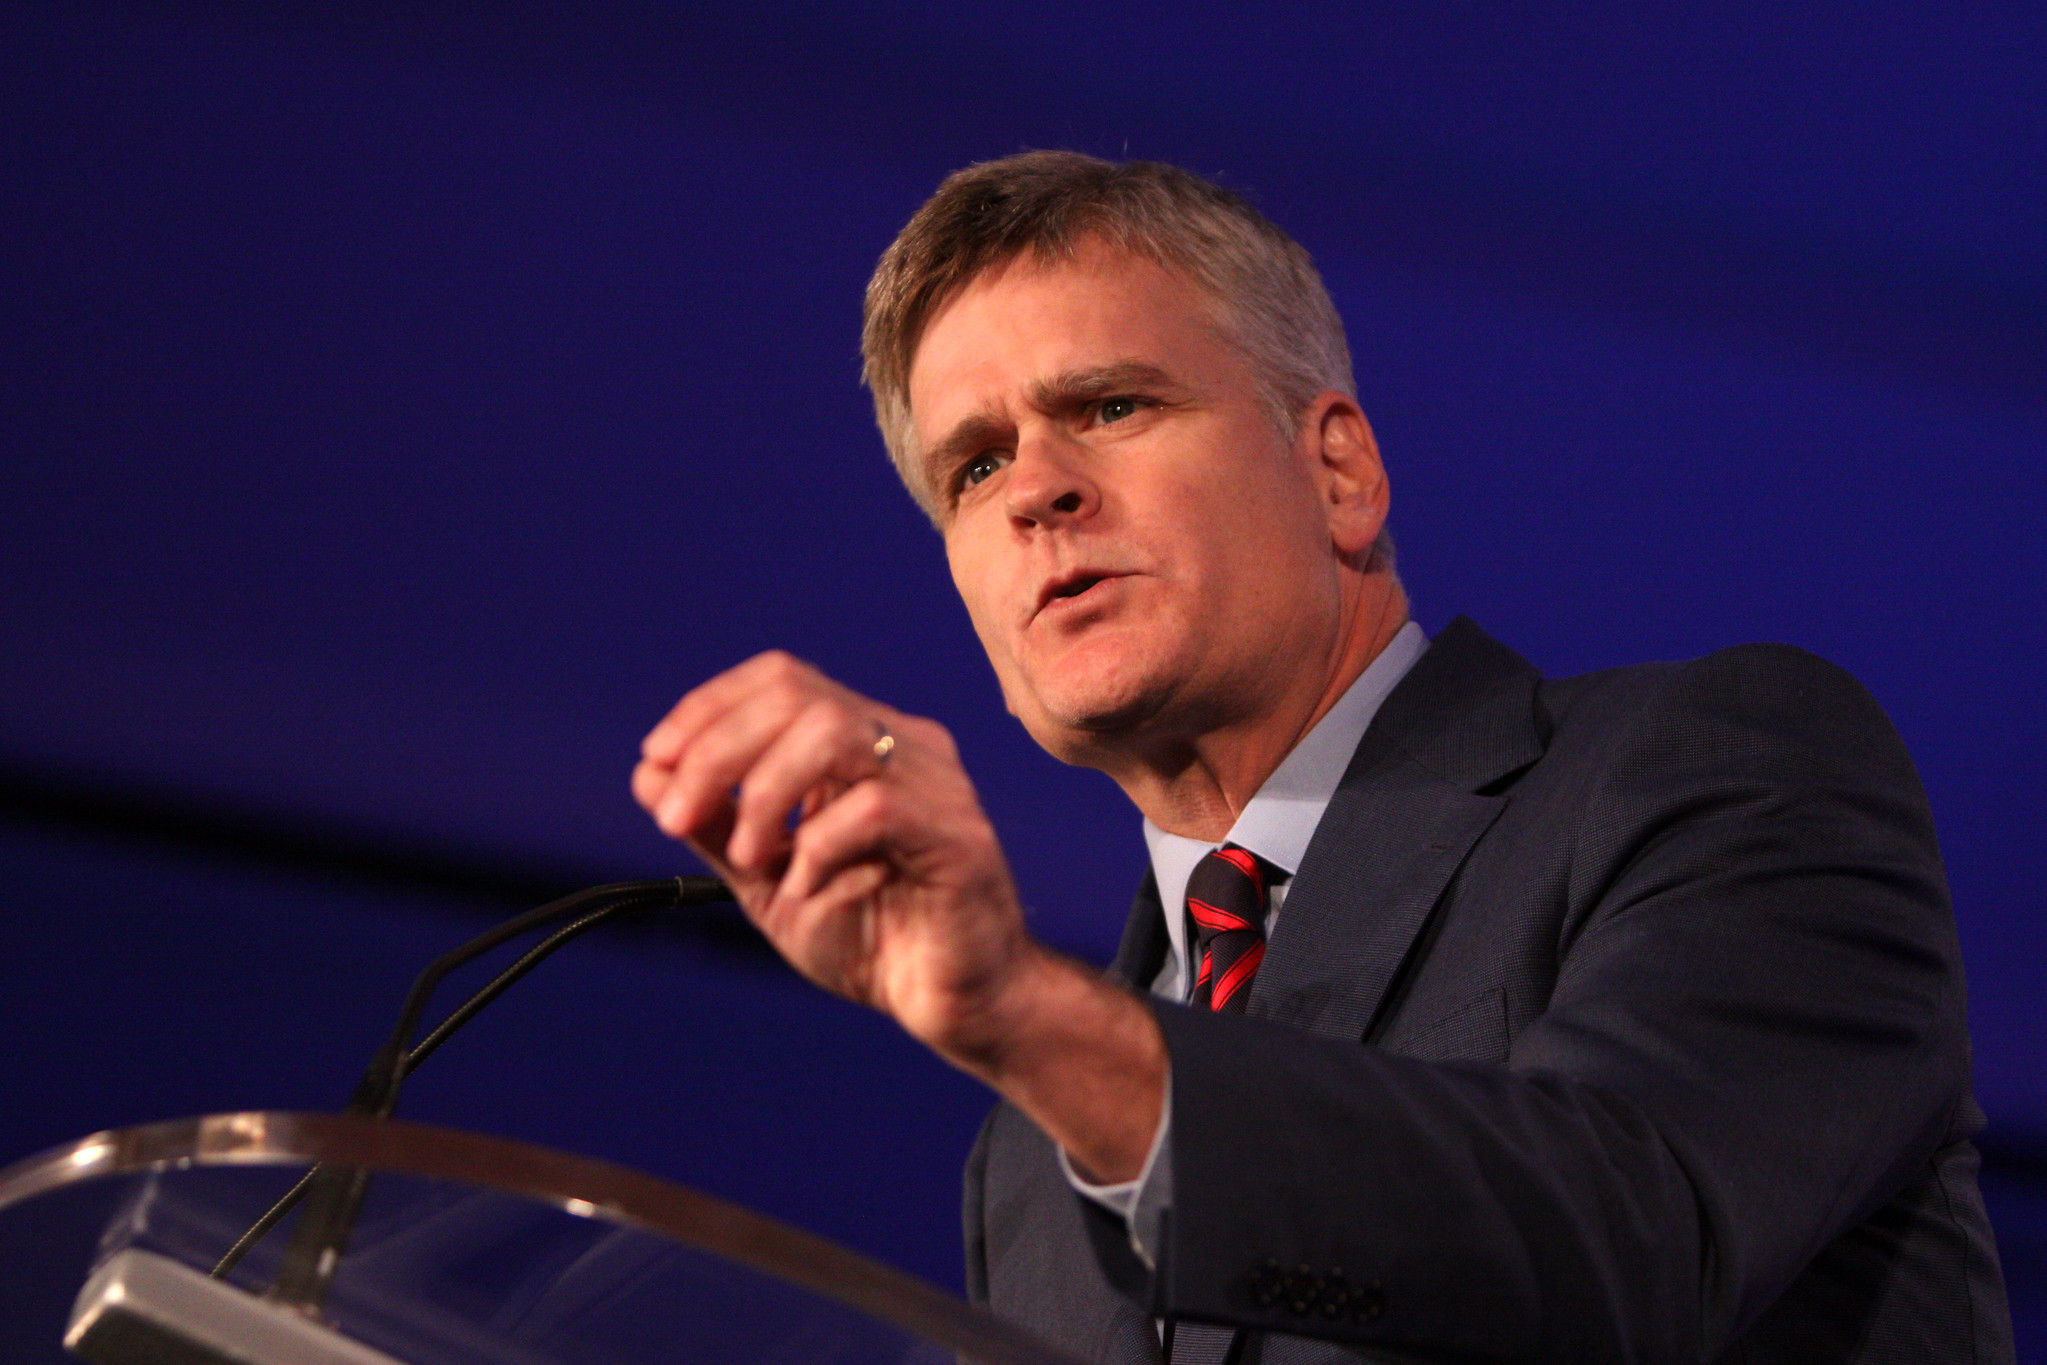 Sen. Bill Cassidy is a pawn of the left when it comes to abortion.